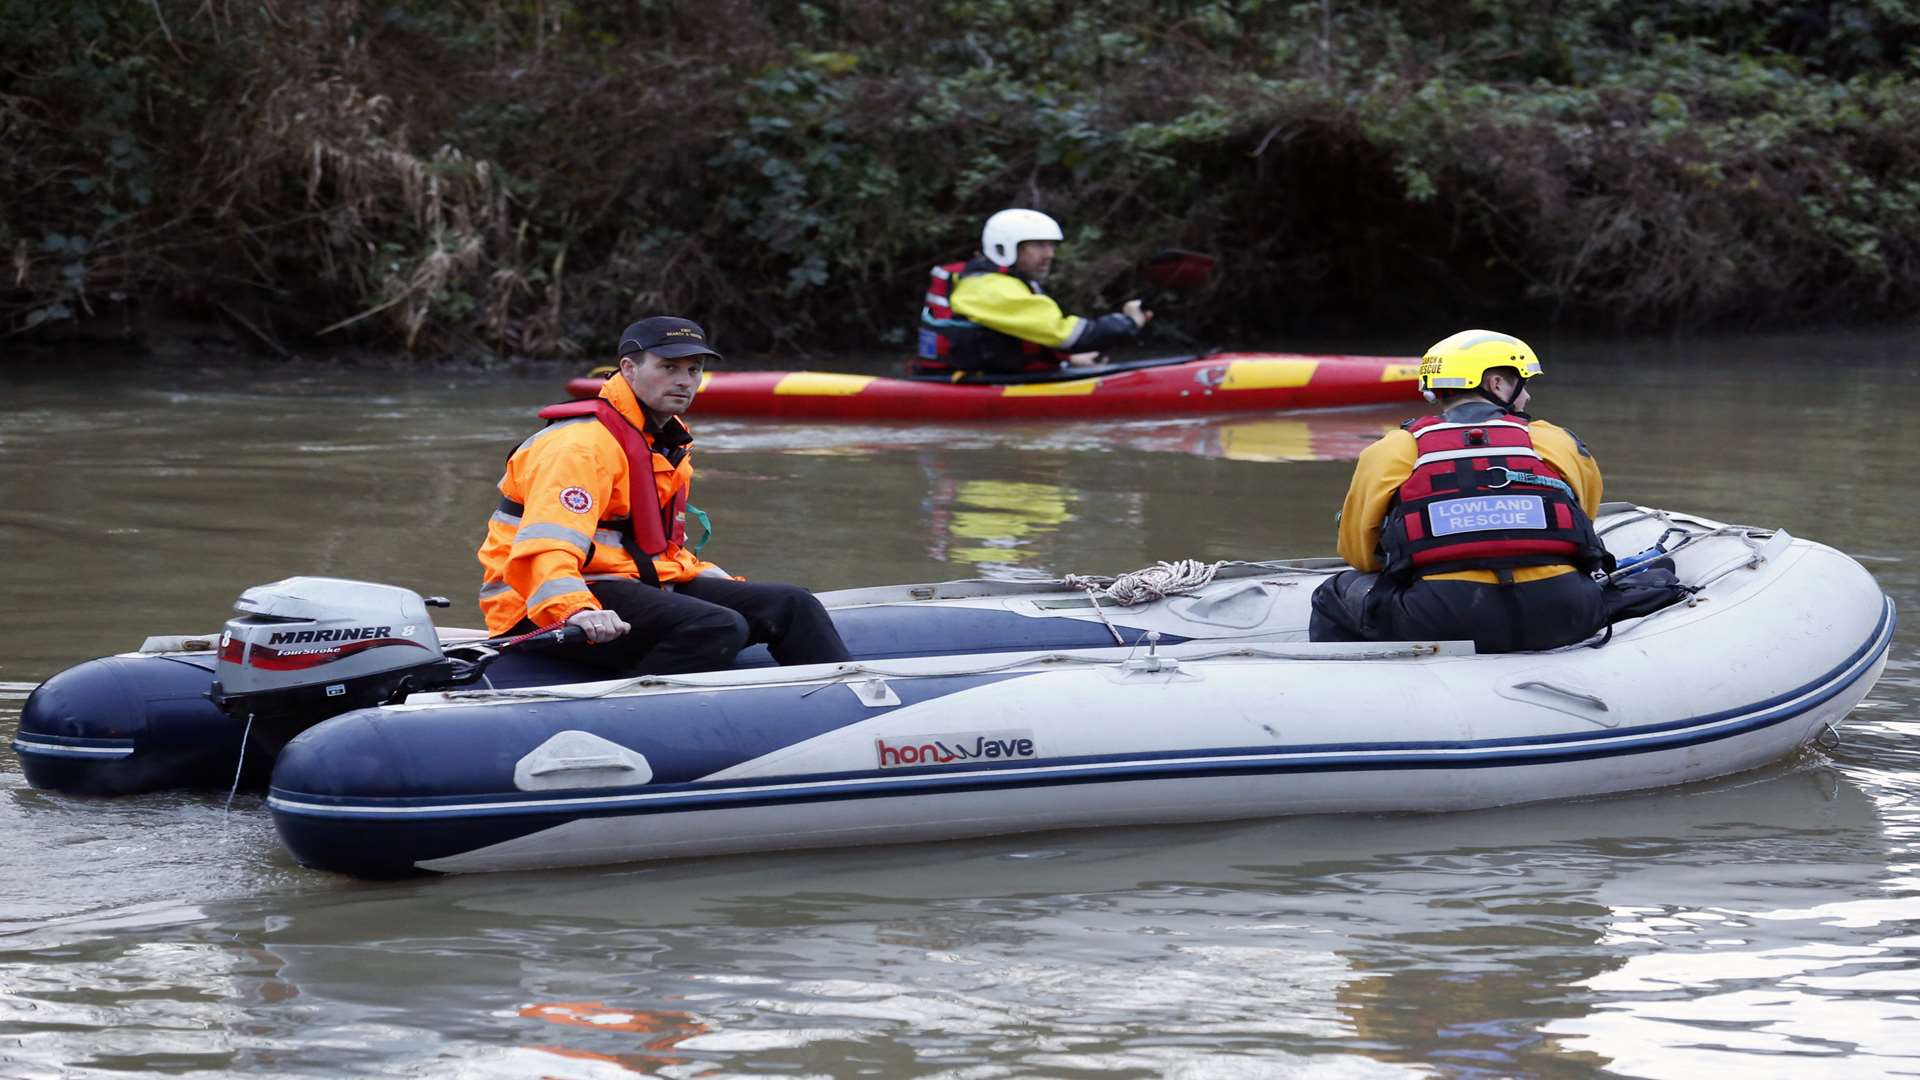 Canoes and dinghies have been used in the search this evening